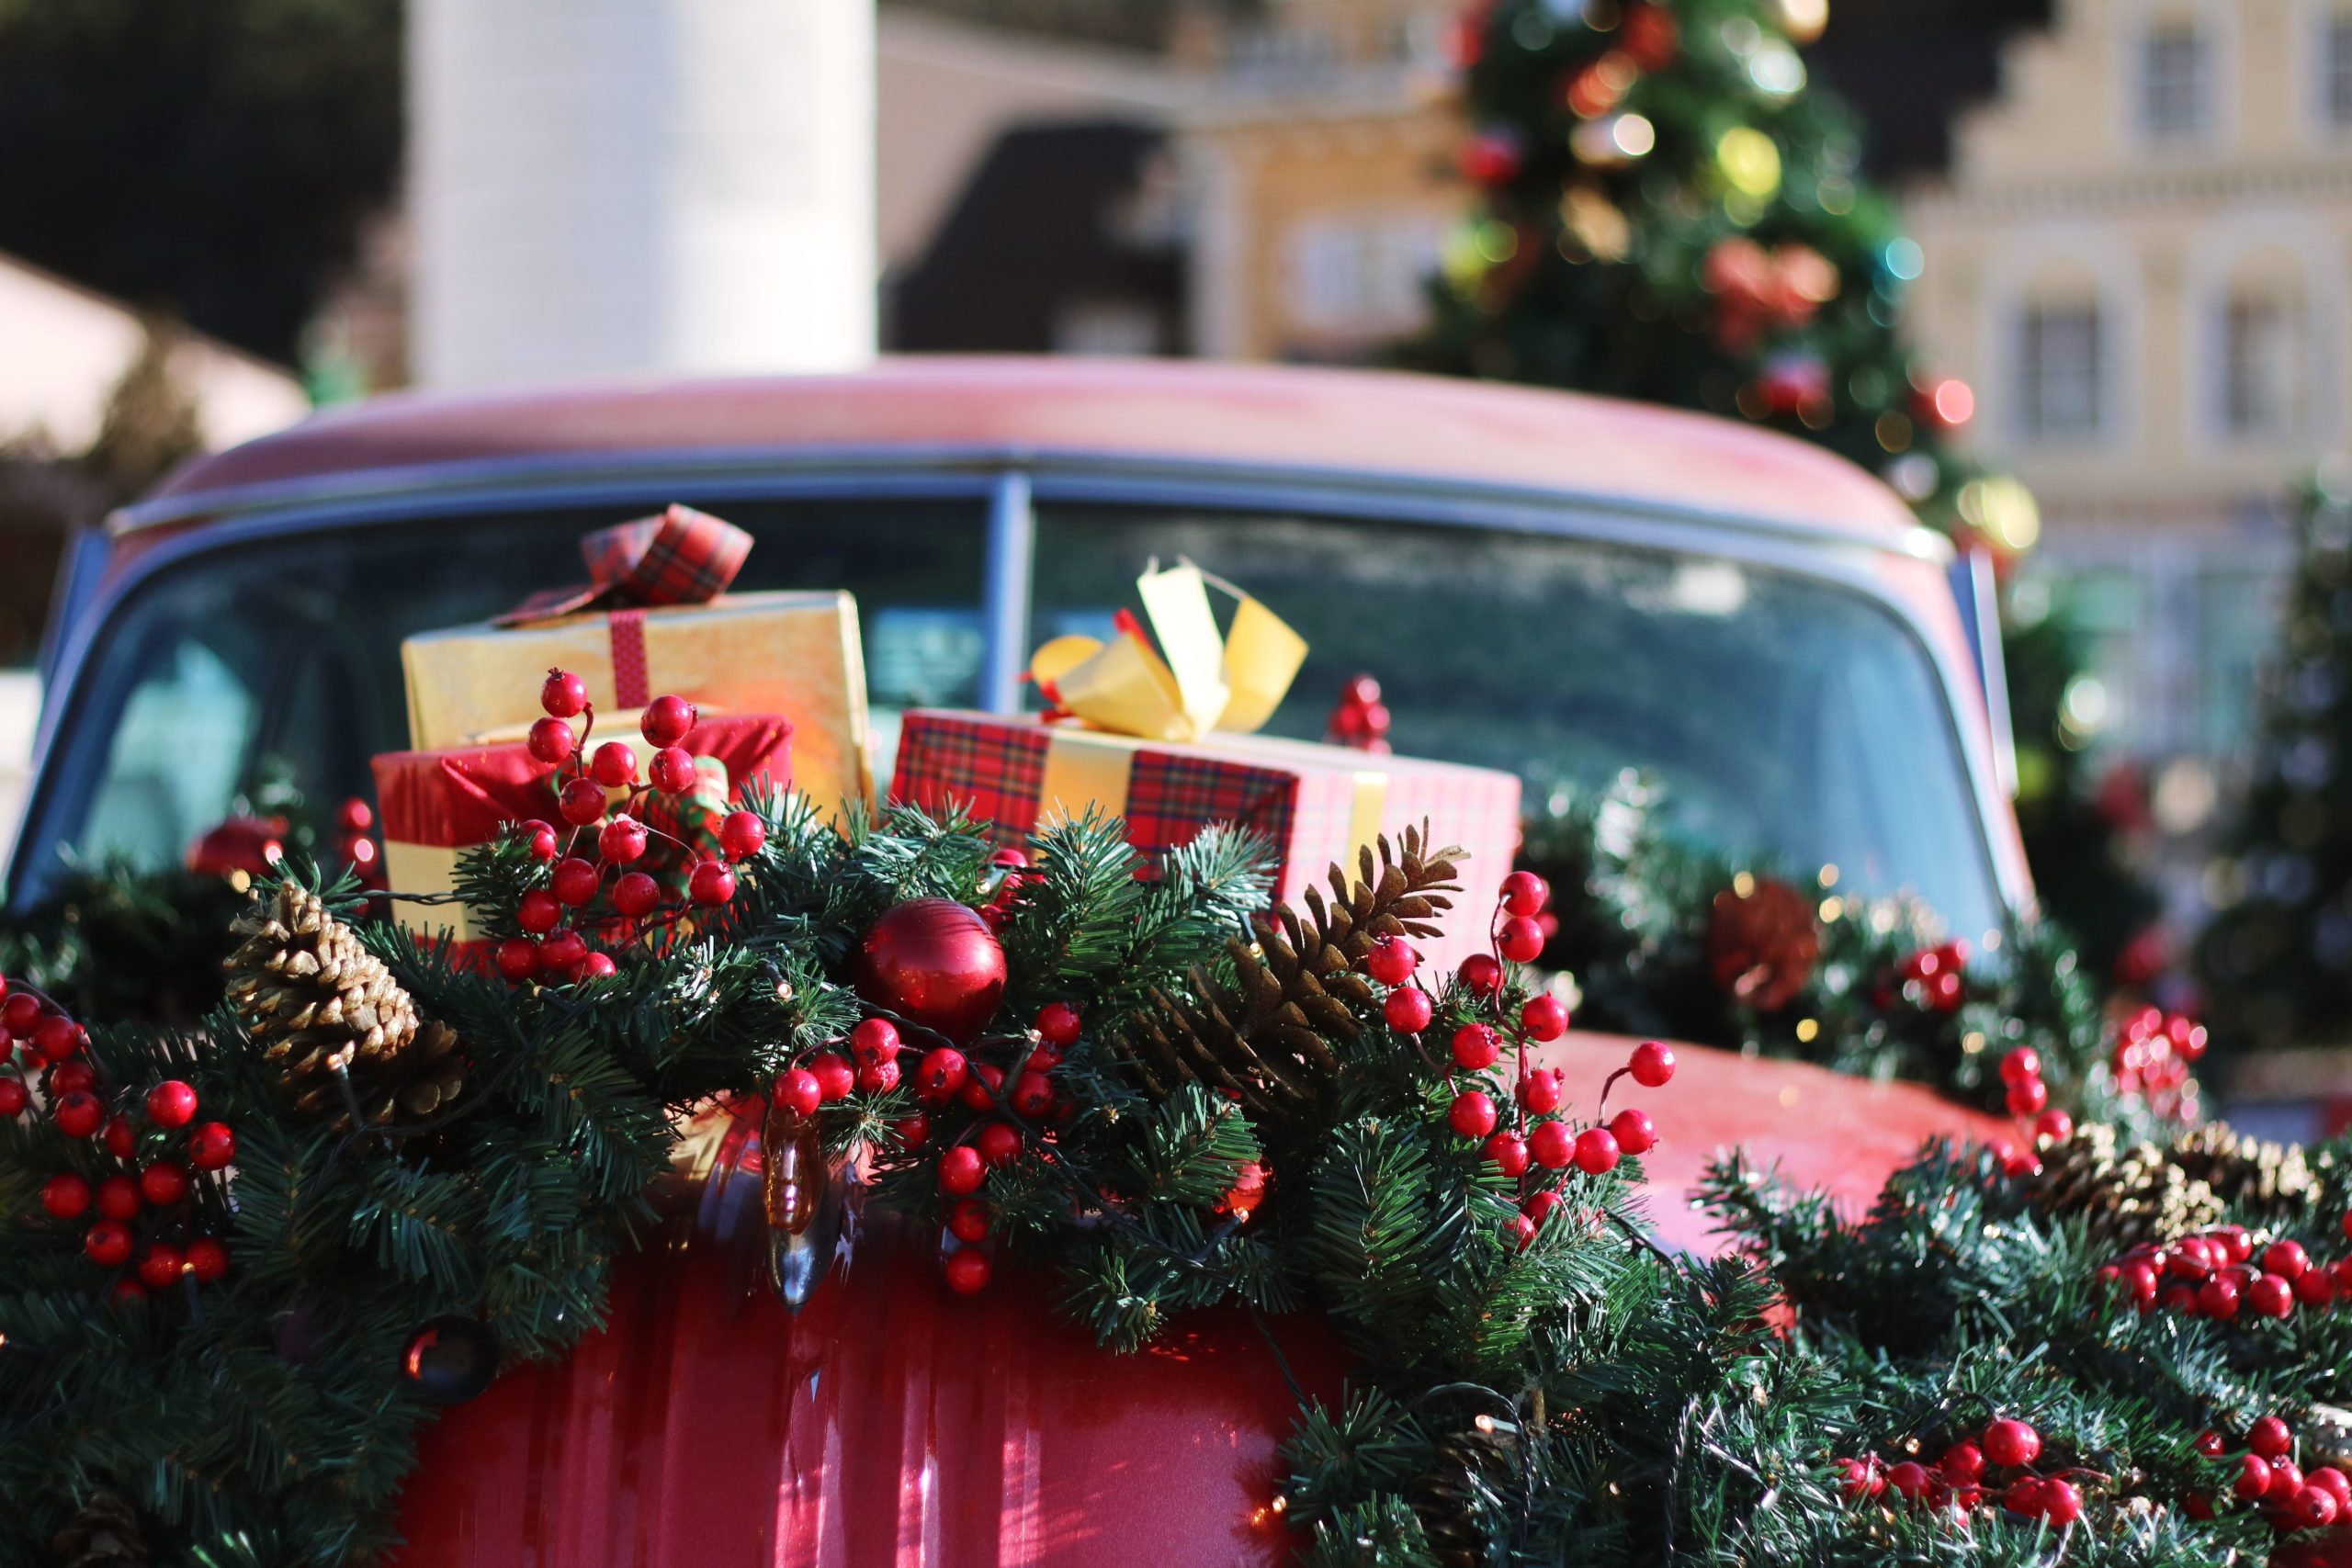 8 automotive book ideas for last-minute Christmas shopping